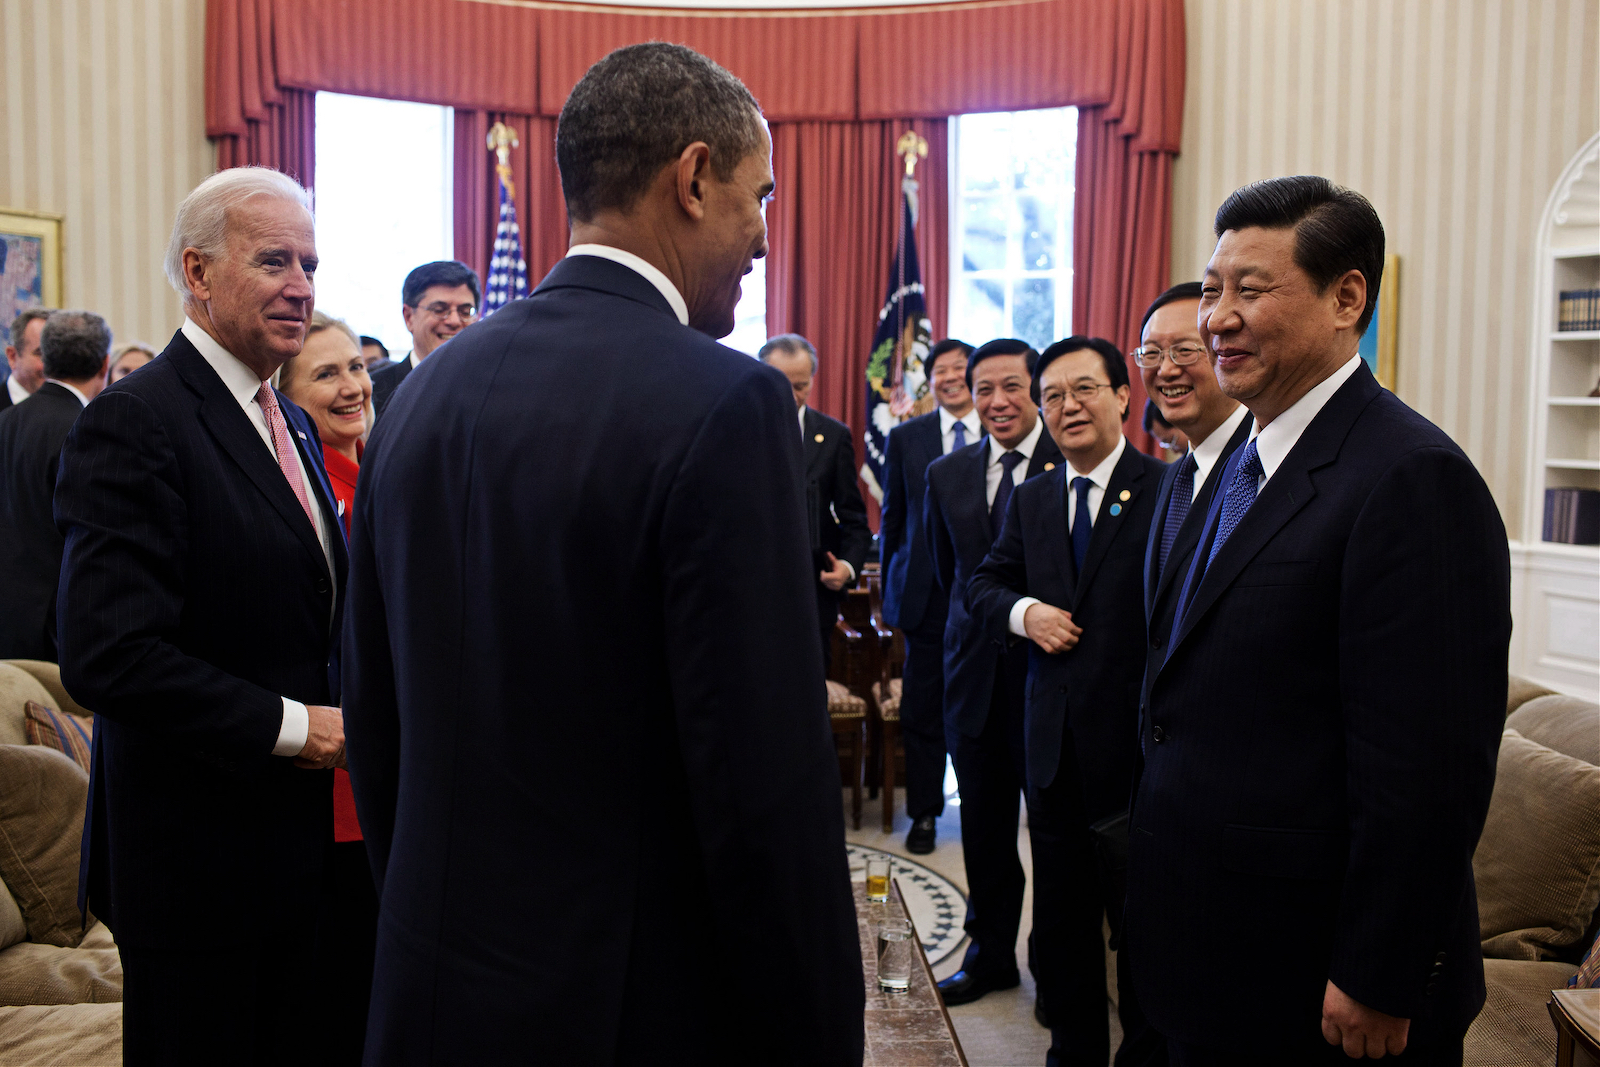 Former President Barack Obama and Chinese President Xi Jinping at the White House